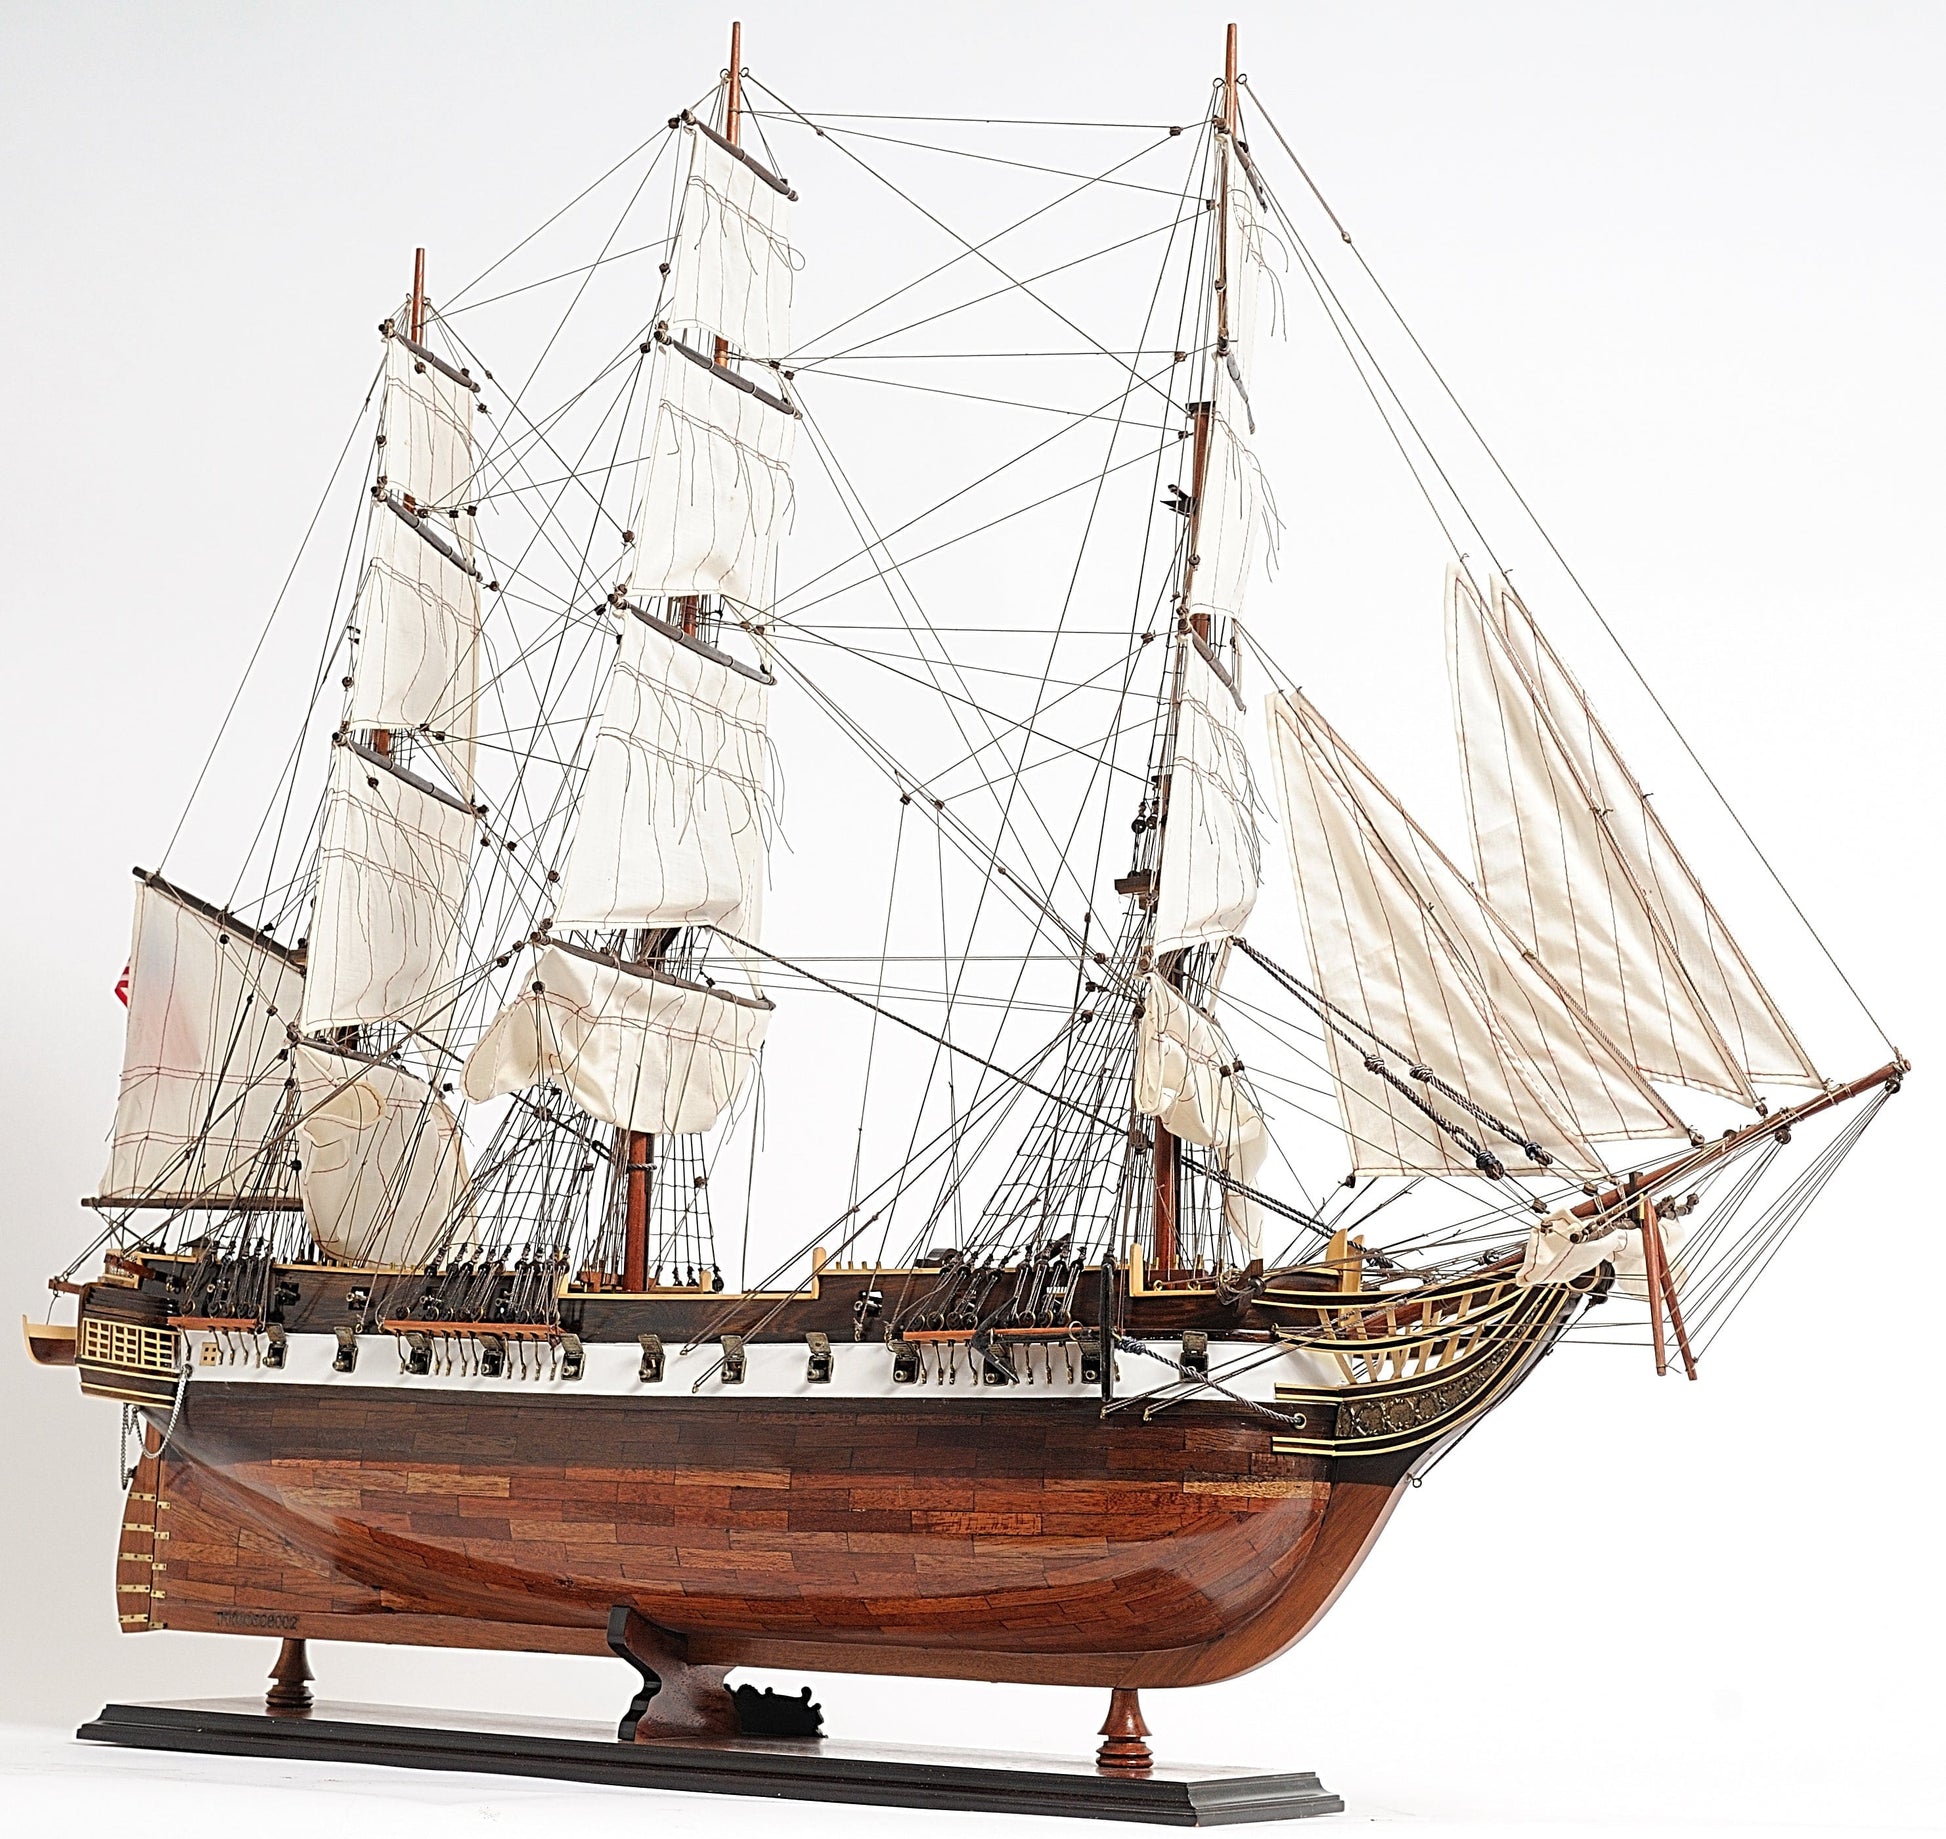 ALDO Hobbies & Creative Arts> Collectibles> Scale Model United States Navy USS Constellation Tall Ship Xtra Large  Wood Model Sailboat Assembled